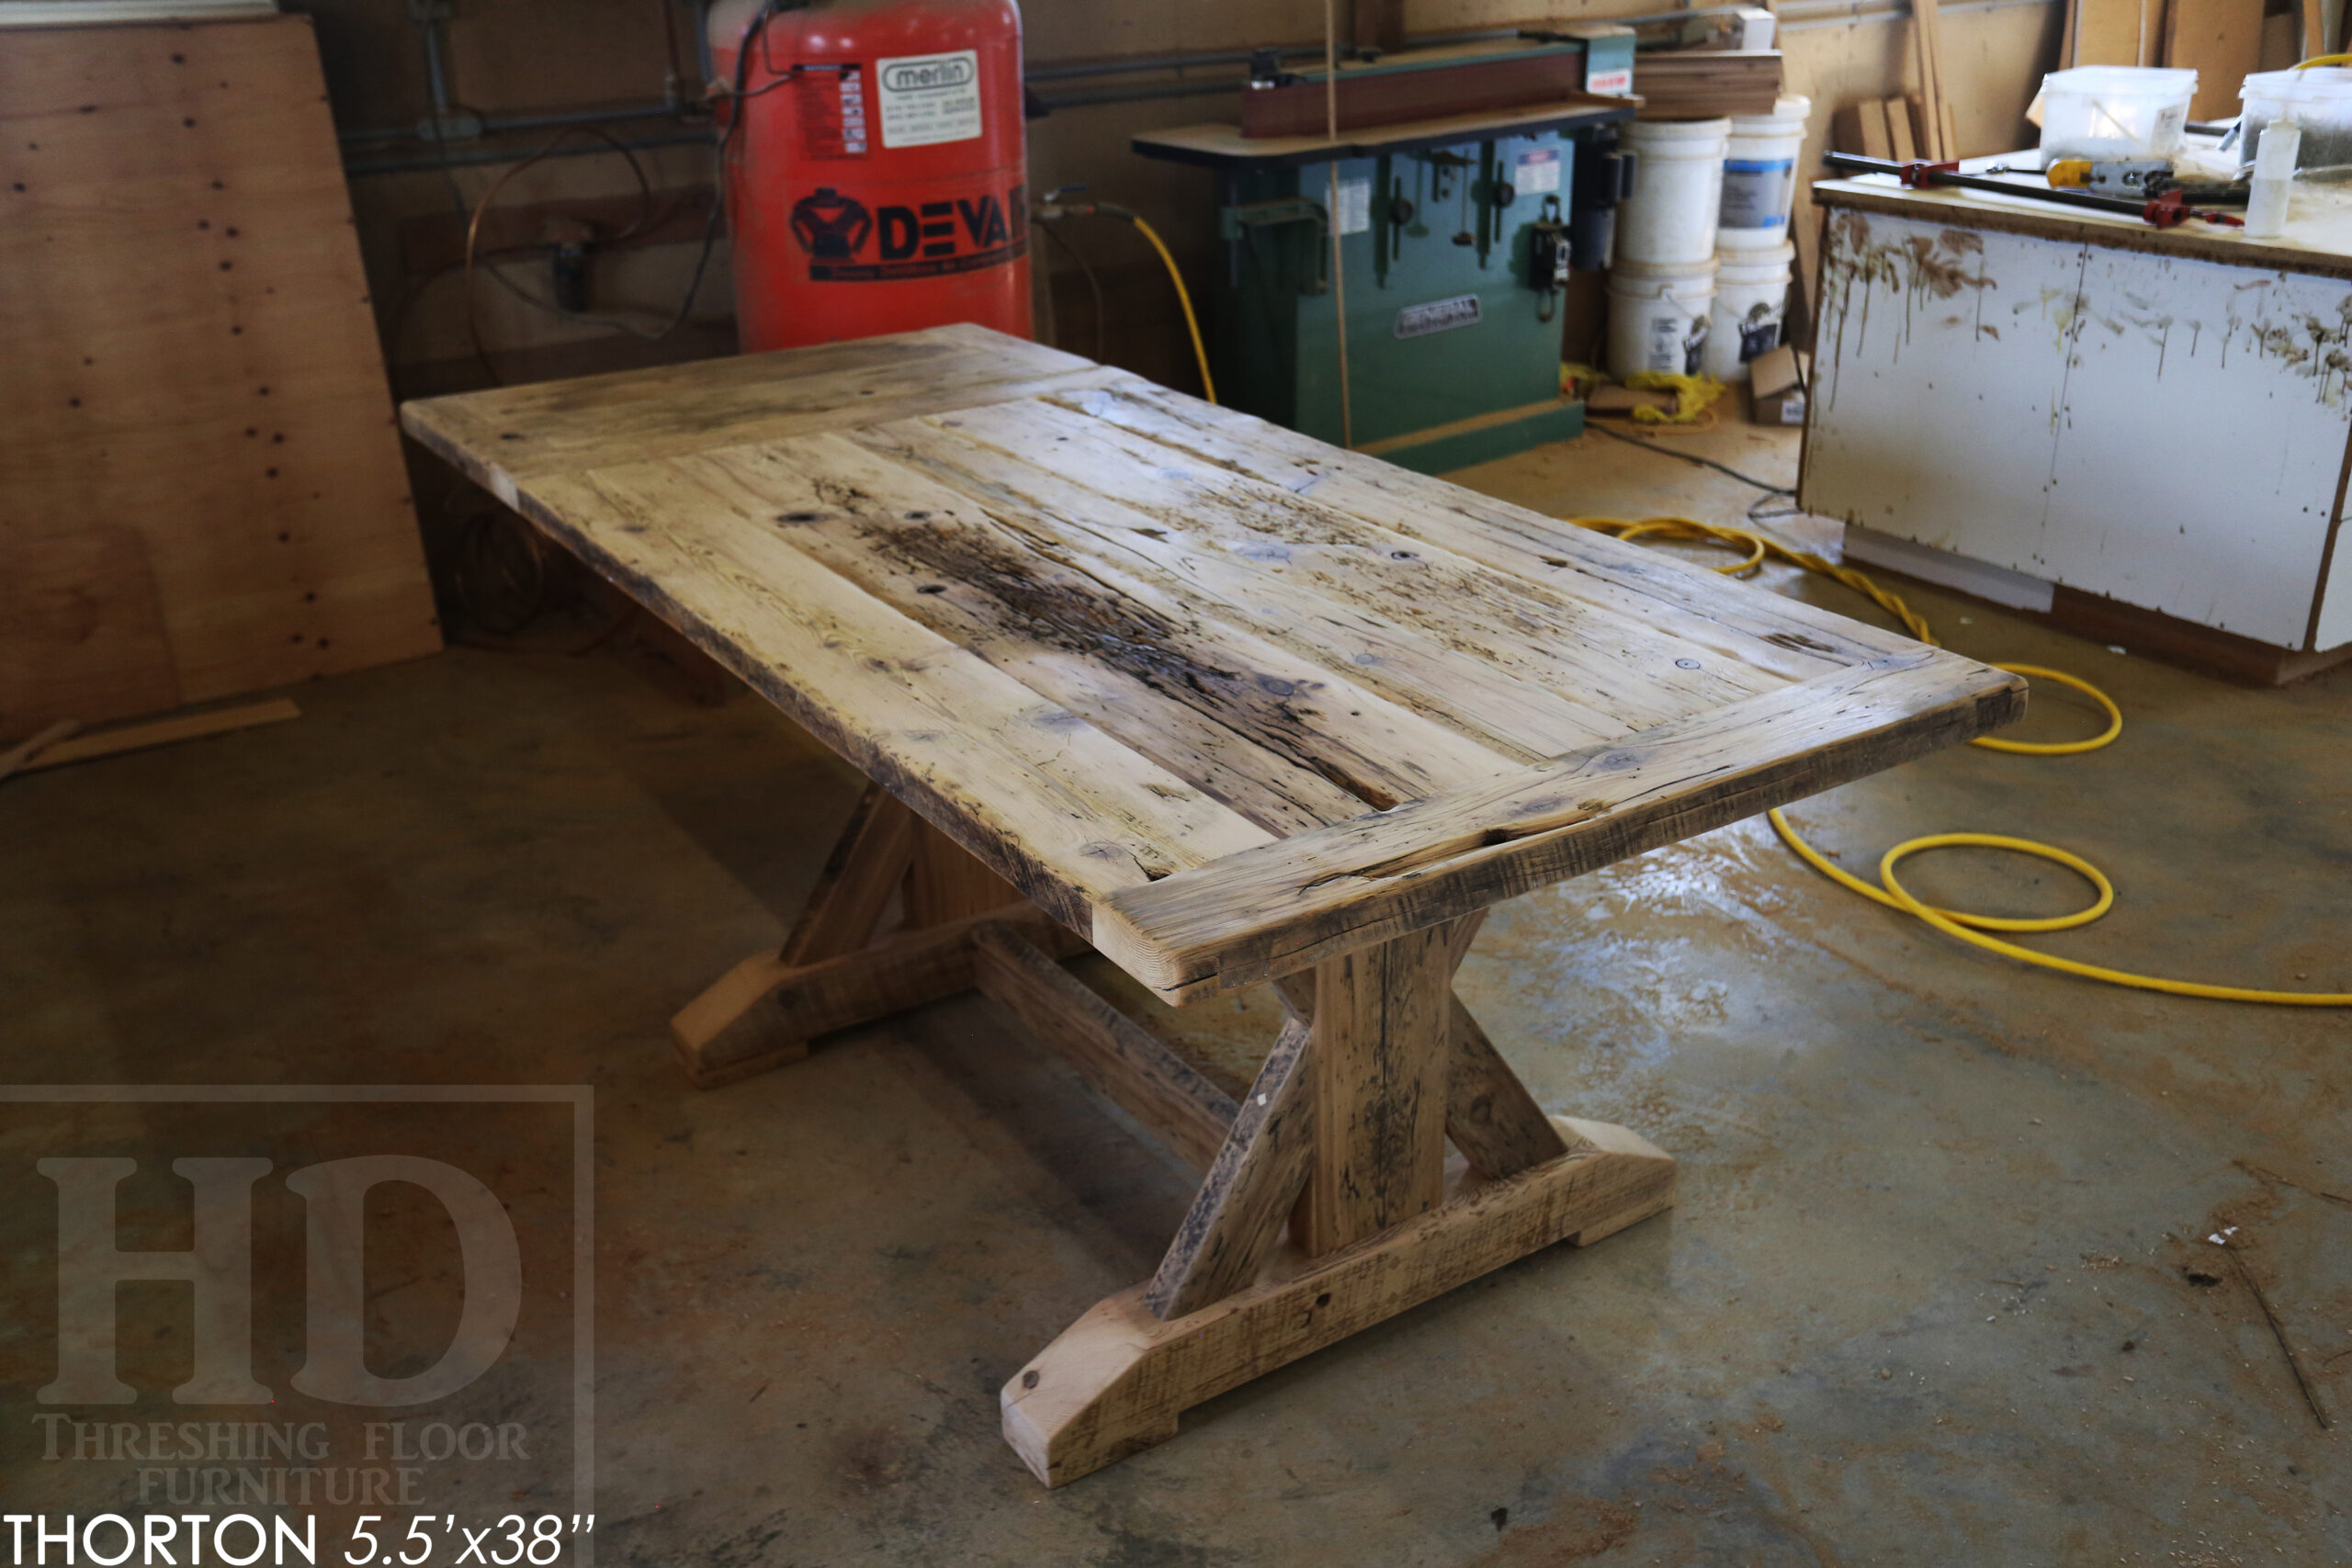 5.5' Reclaimed Wood Table we made for an Ontario home - 38" wide - Sawbuck Base / Painted Black - Old Growth Hemlock Threshing Floor Construction - Original edges & distressing maintained - Premium epoxy + satin polyurethane finish - 5' Trestle Bench - www.table.ca